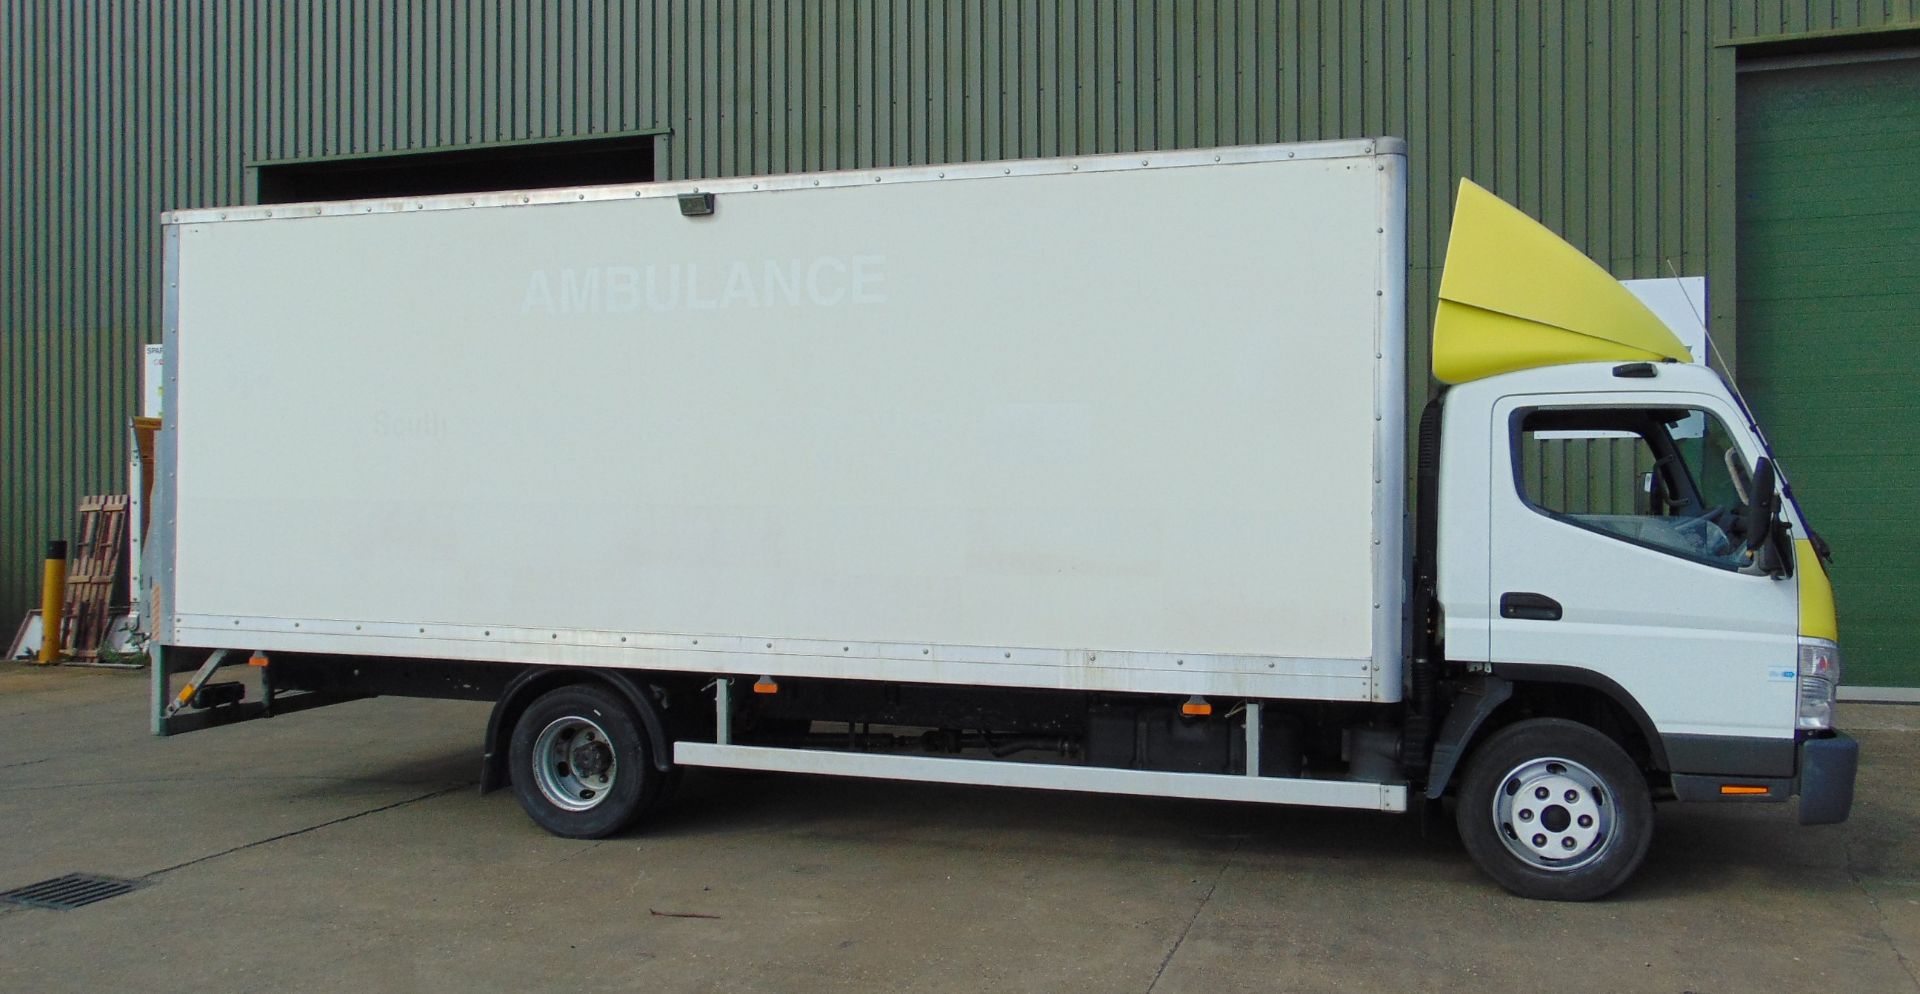 2011 Mitsubishi Fuso Canter Box lorry 7.5T - Only 5400 Miles! - Image 13 of 51